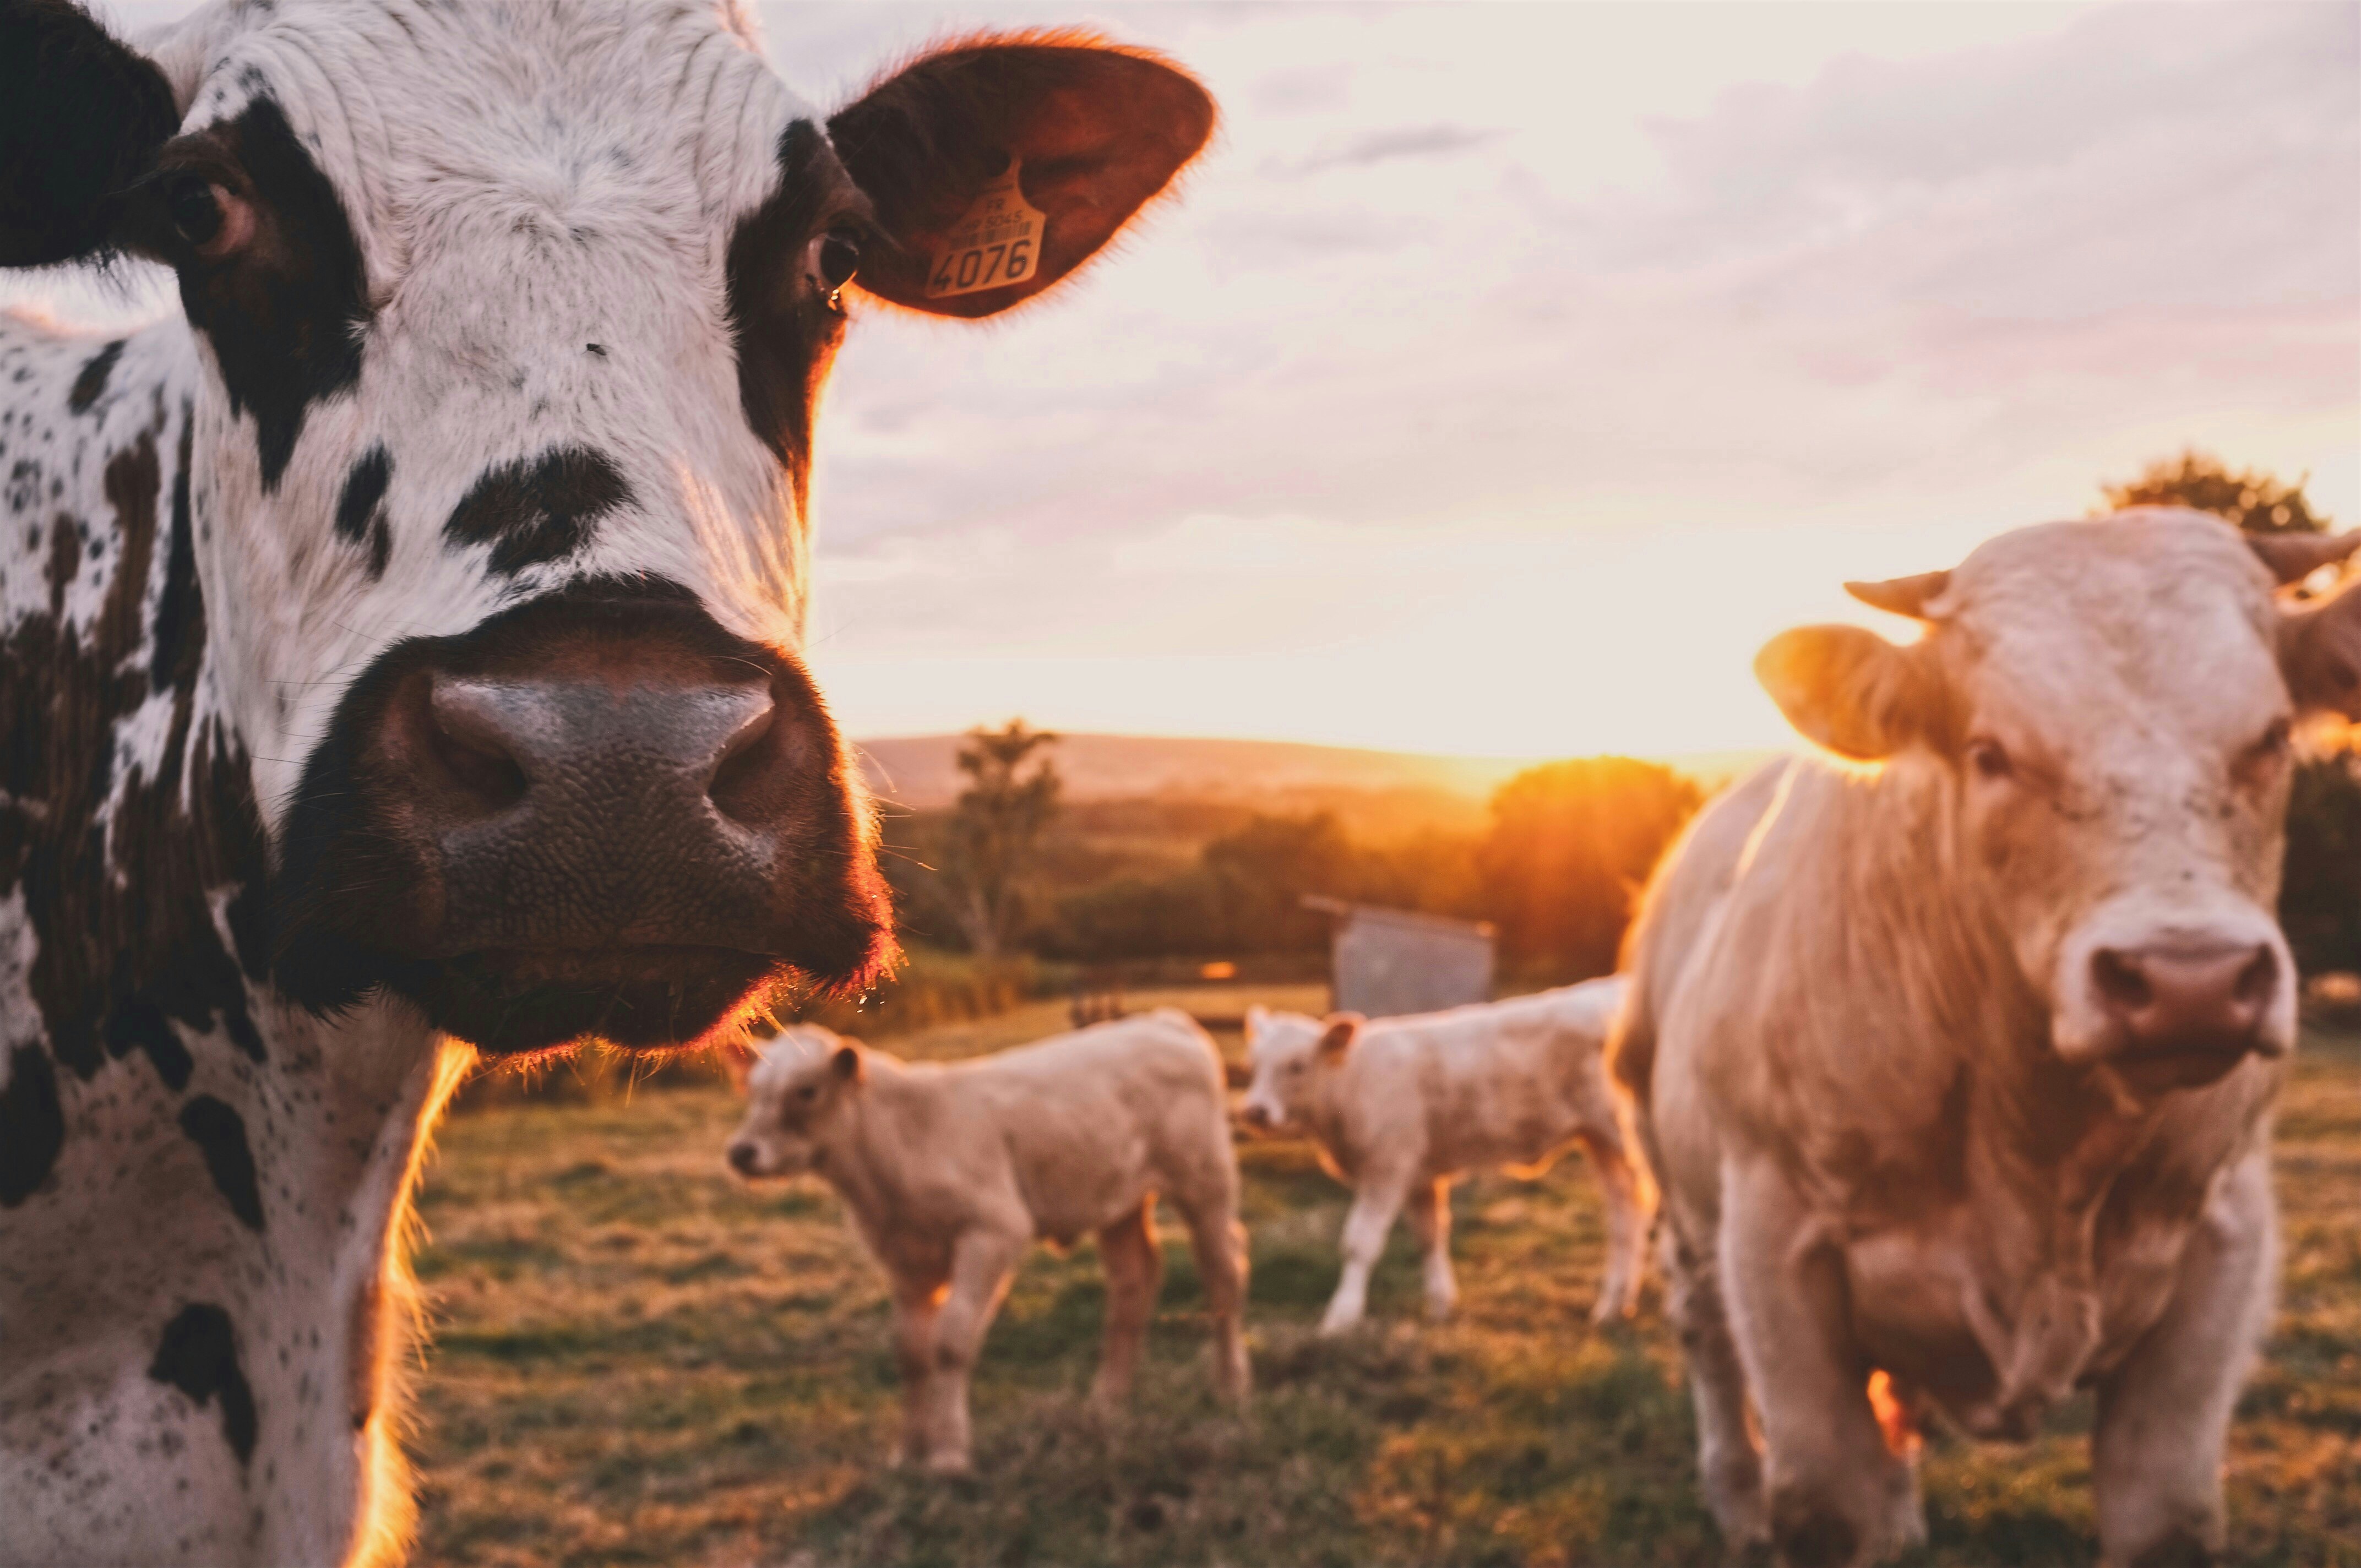 Our community of professional photographers didn't have to travel far to capture these cow images. Check out our collection of high-res cow images, shot righ from the picturesque farms and towns of America's backyard.